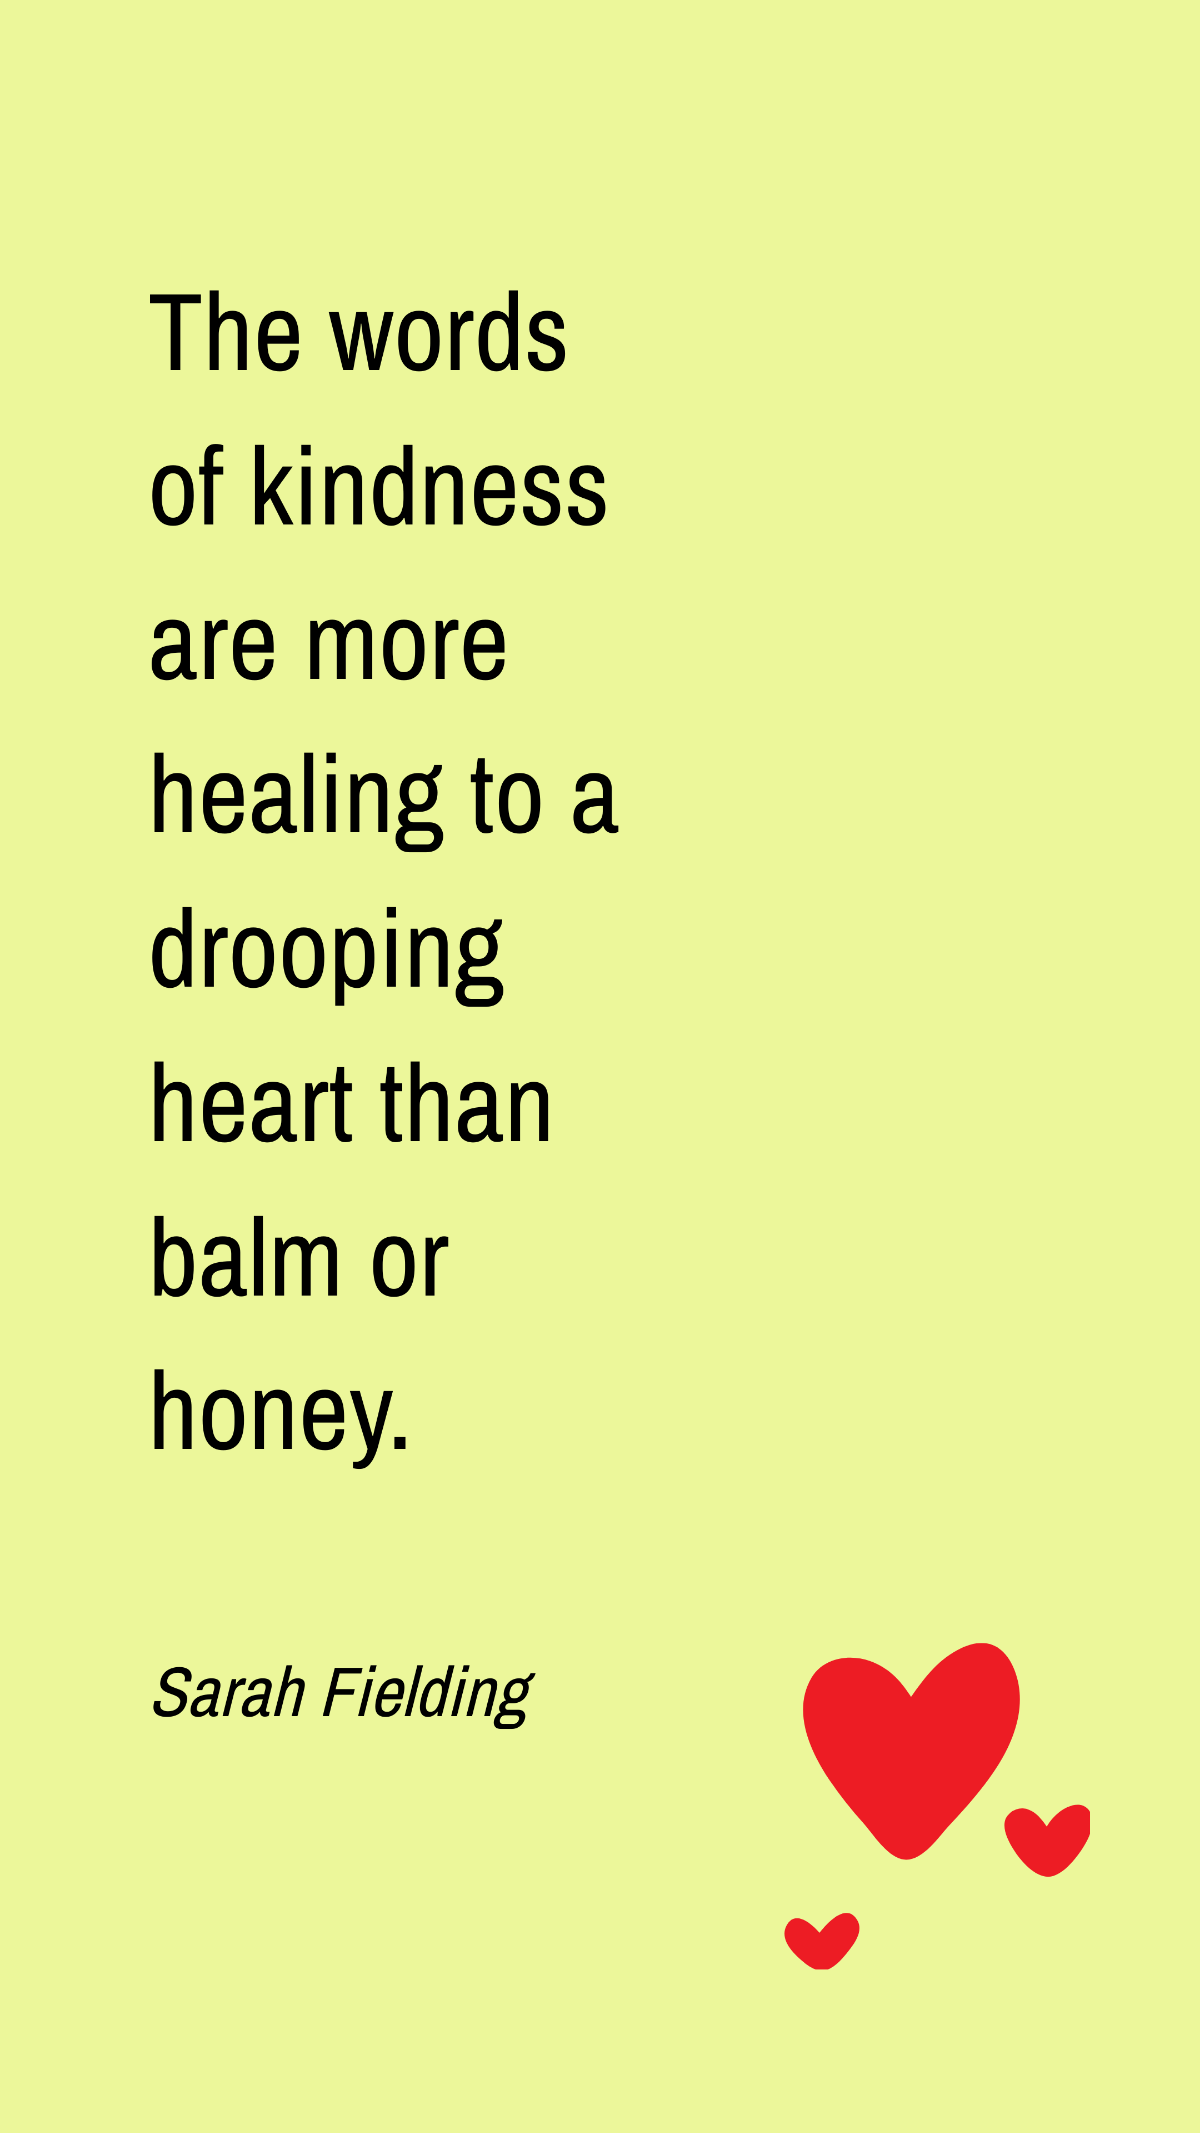 Sarah Fielding - The words of kindness are more healing to a drooping heart than balm or honey. Template